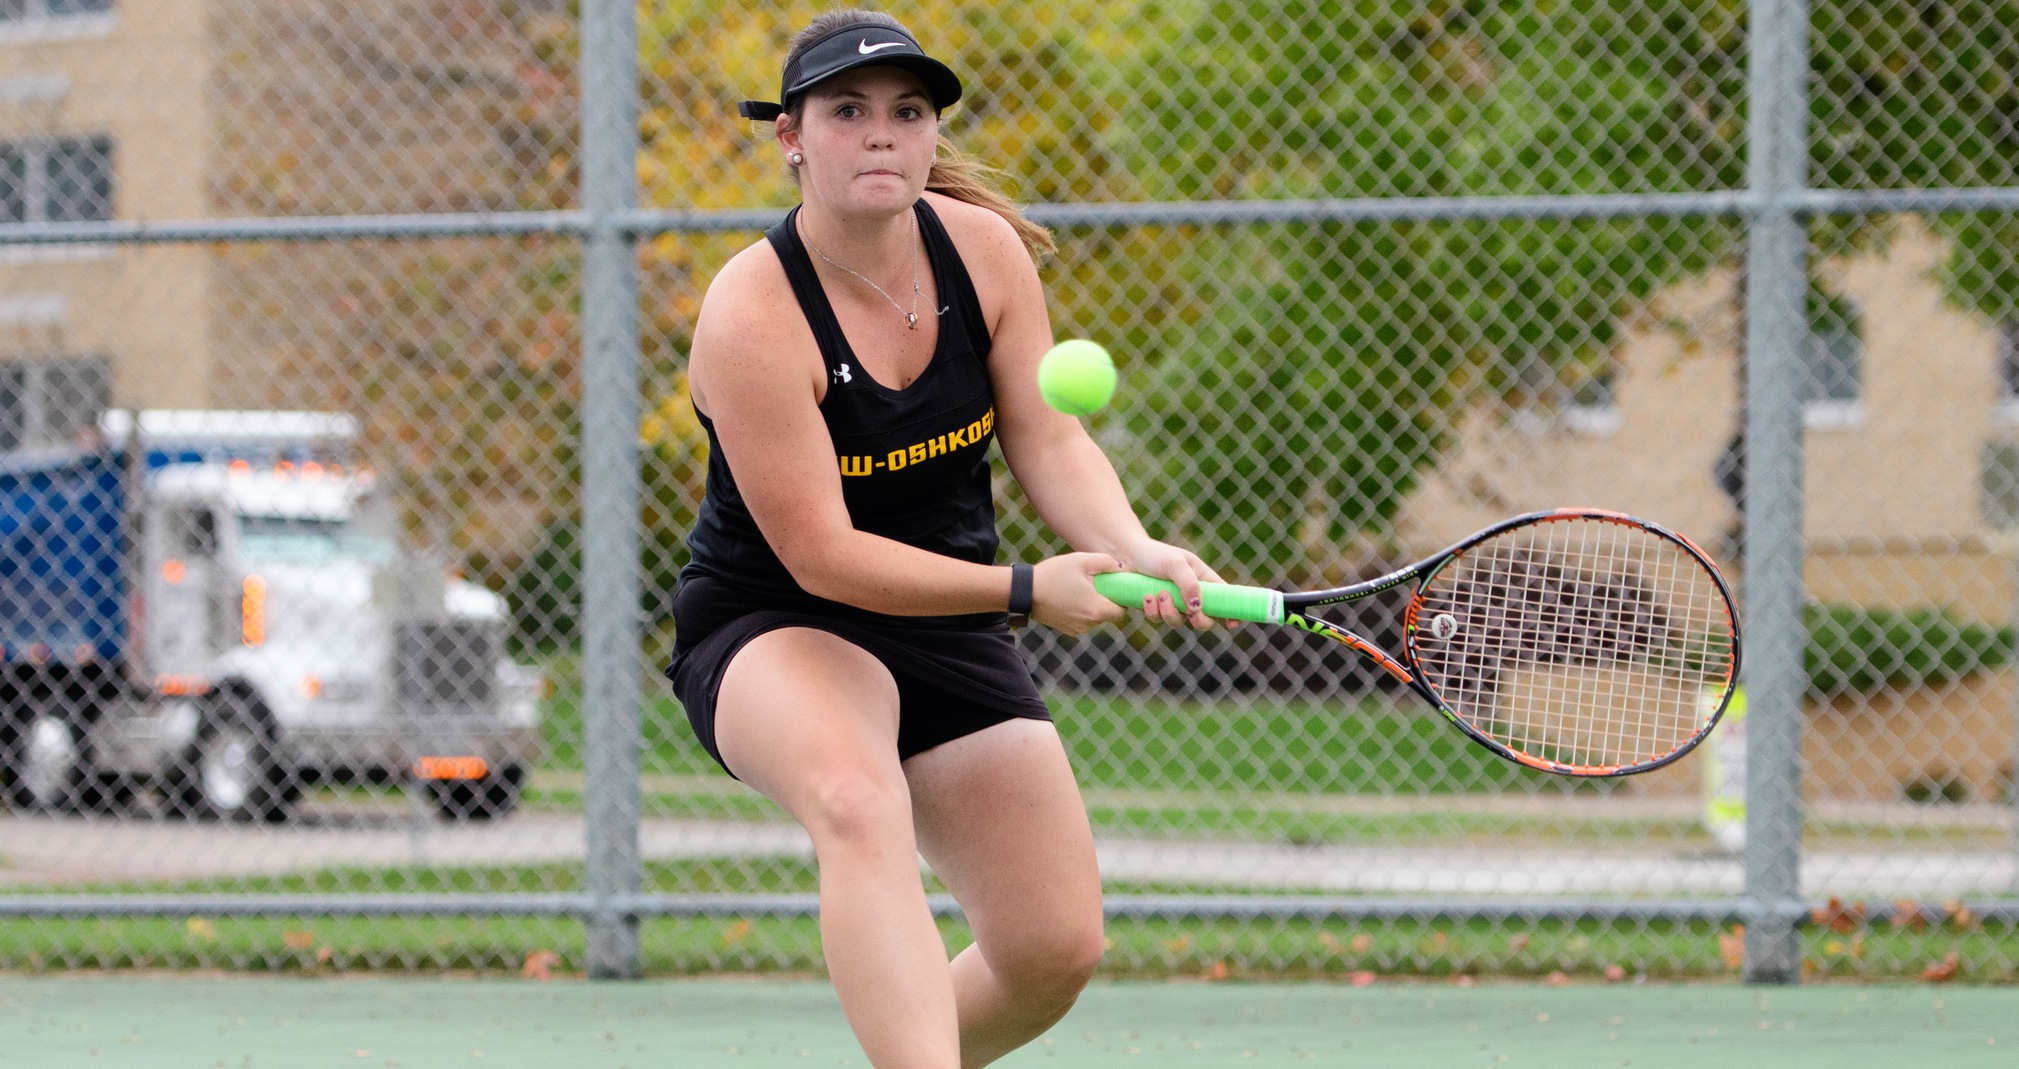 Samantha Koppa won a team-best four games while competing at No. 3 singles.